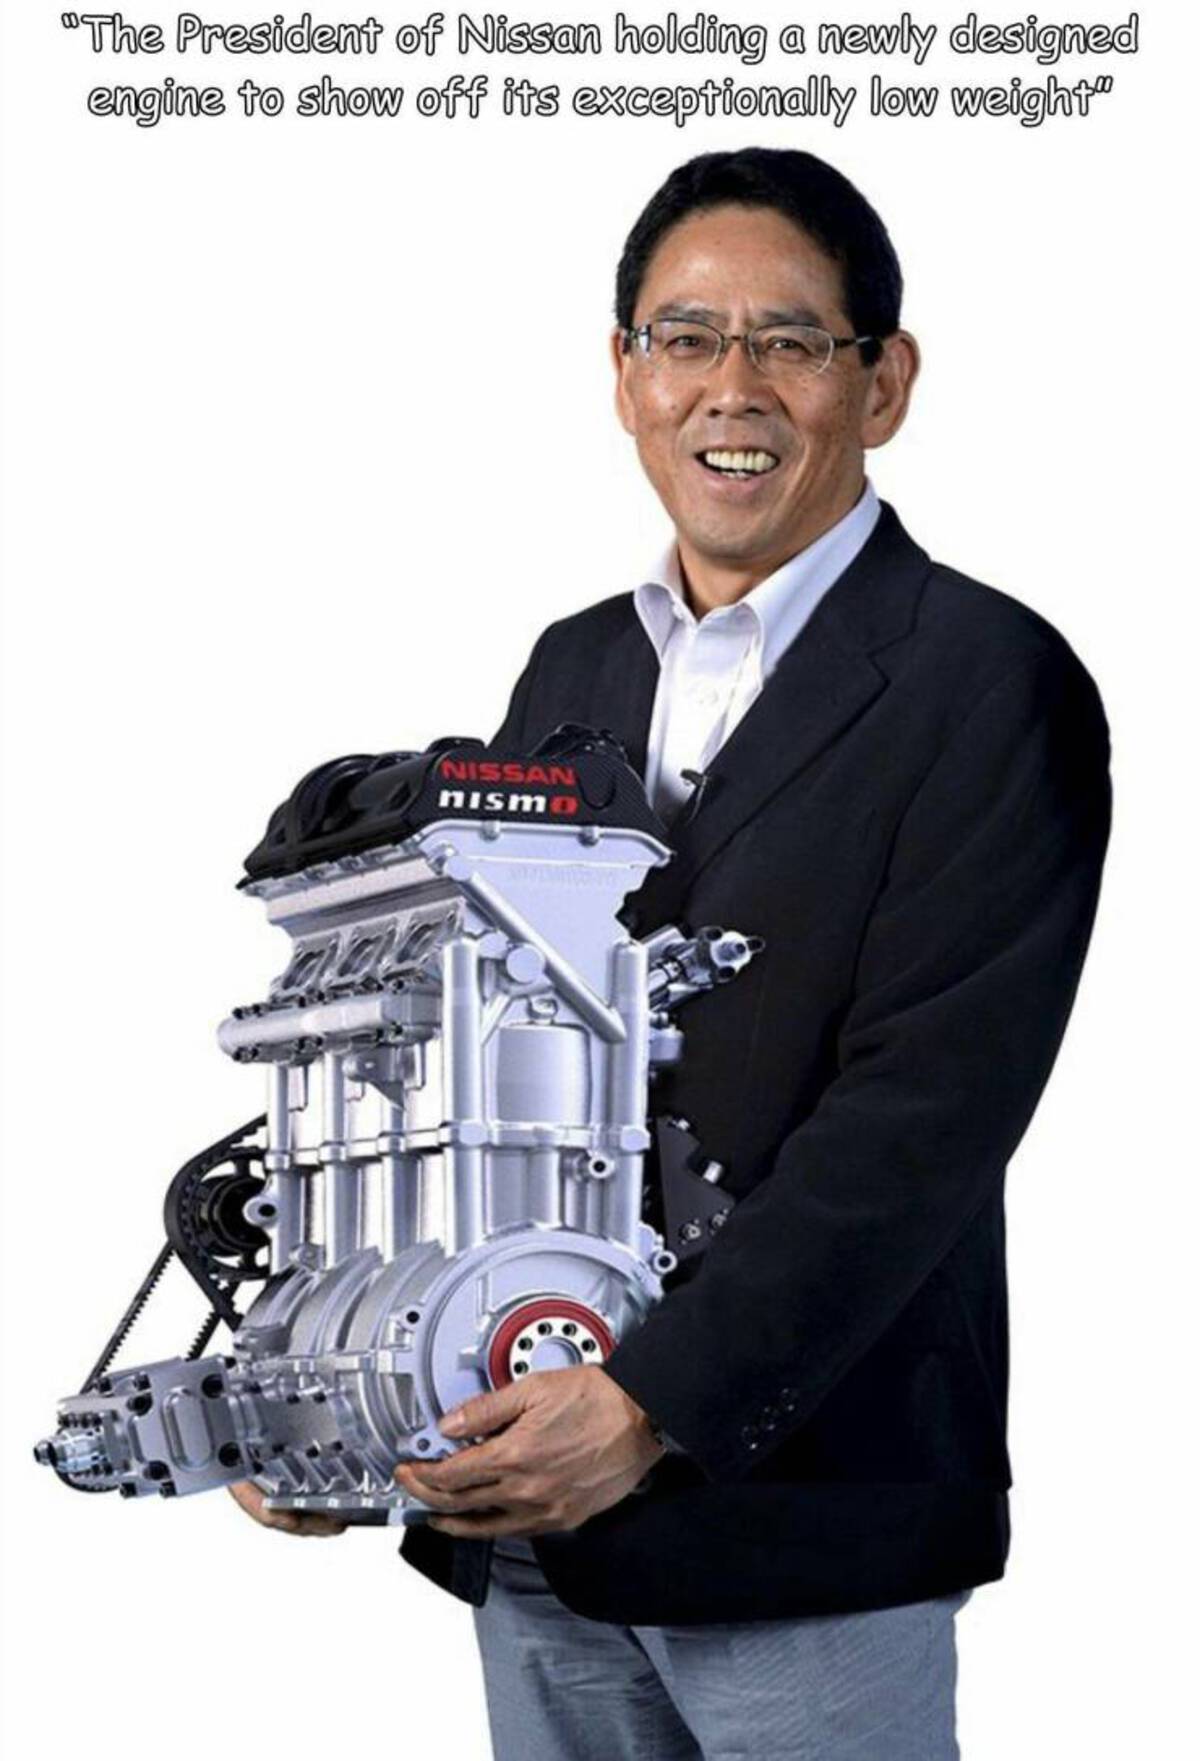 nissan 400 hp 3 cylinder - "The President of Nissan holding a newly designed engine to show off its exceptionally low weight" Nissan nismo